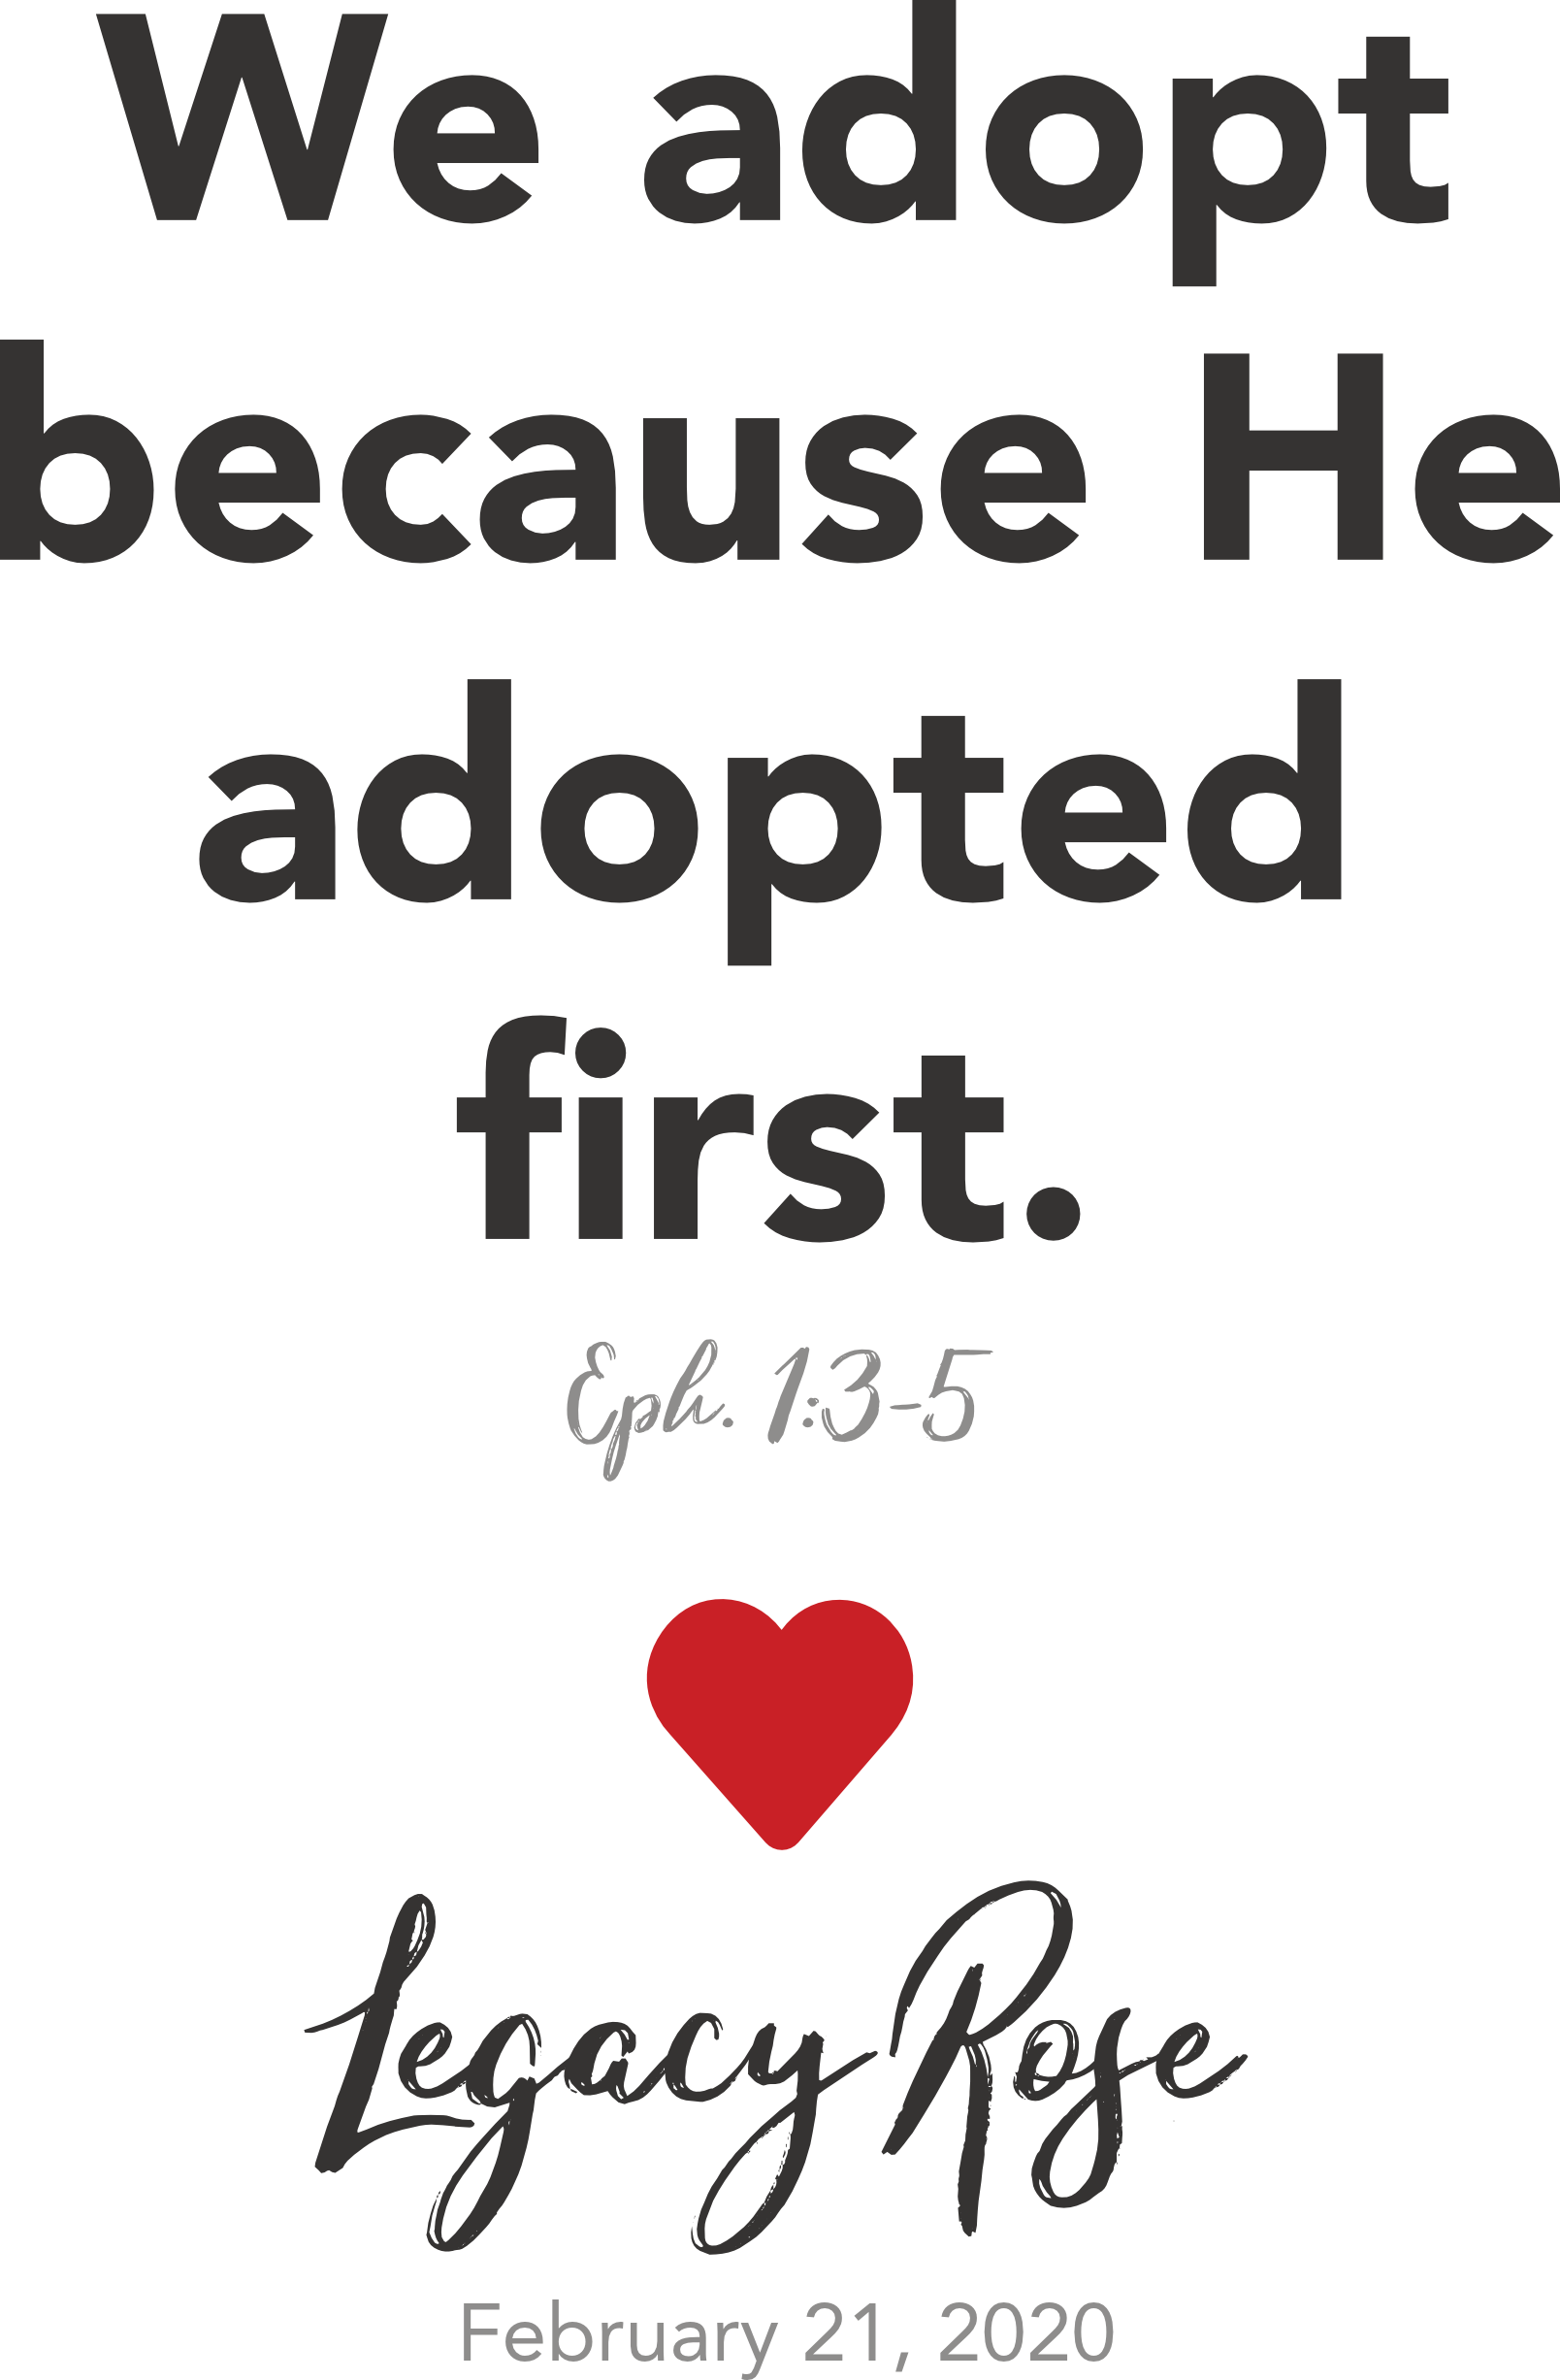 We adopt because He adopted first. Ephesians 1:3-5 ♥ Legacy Rose. February 21, 2020.